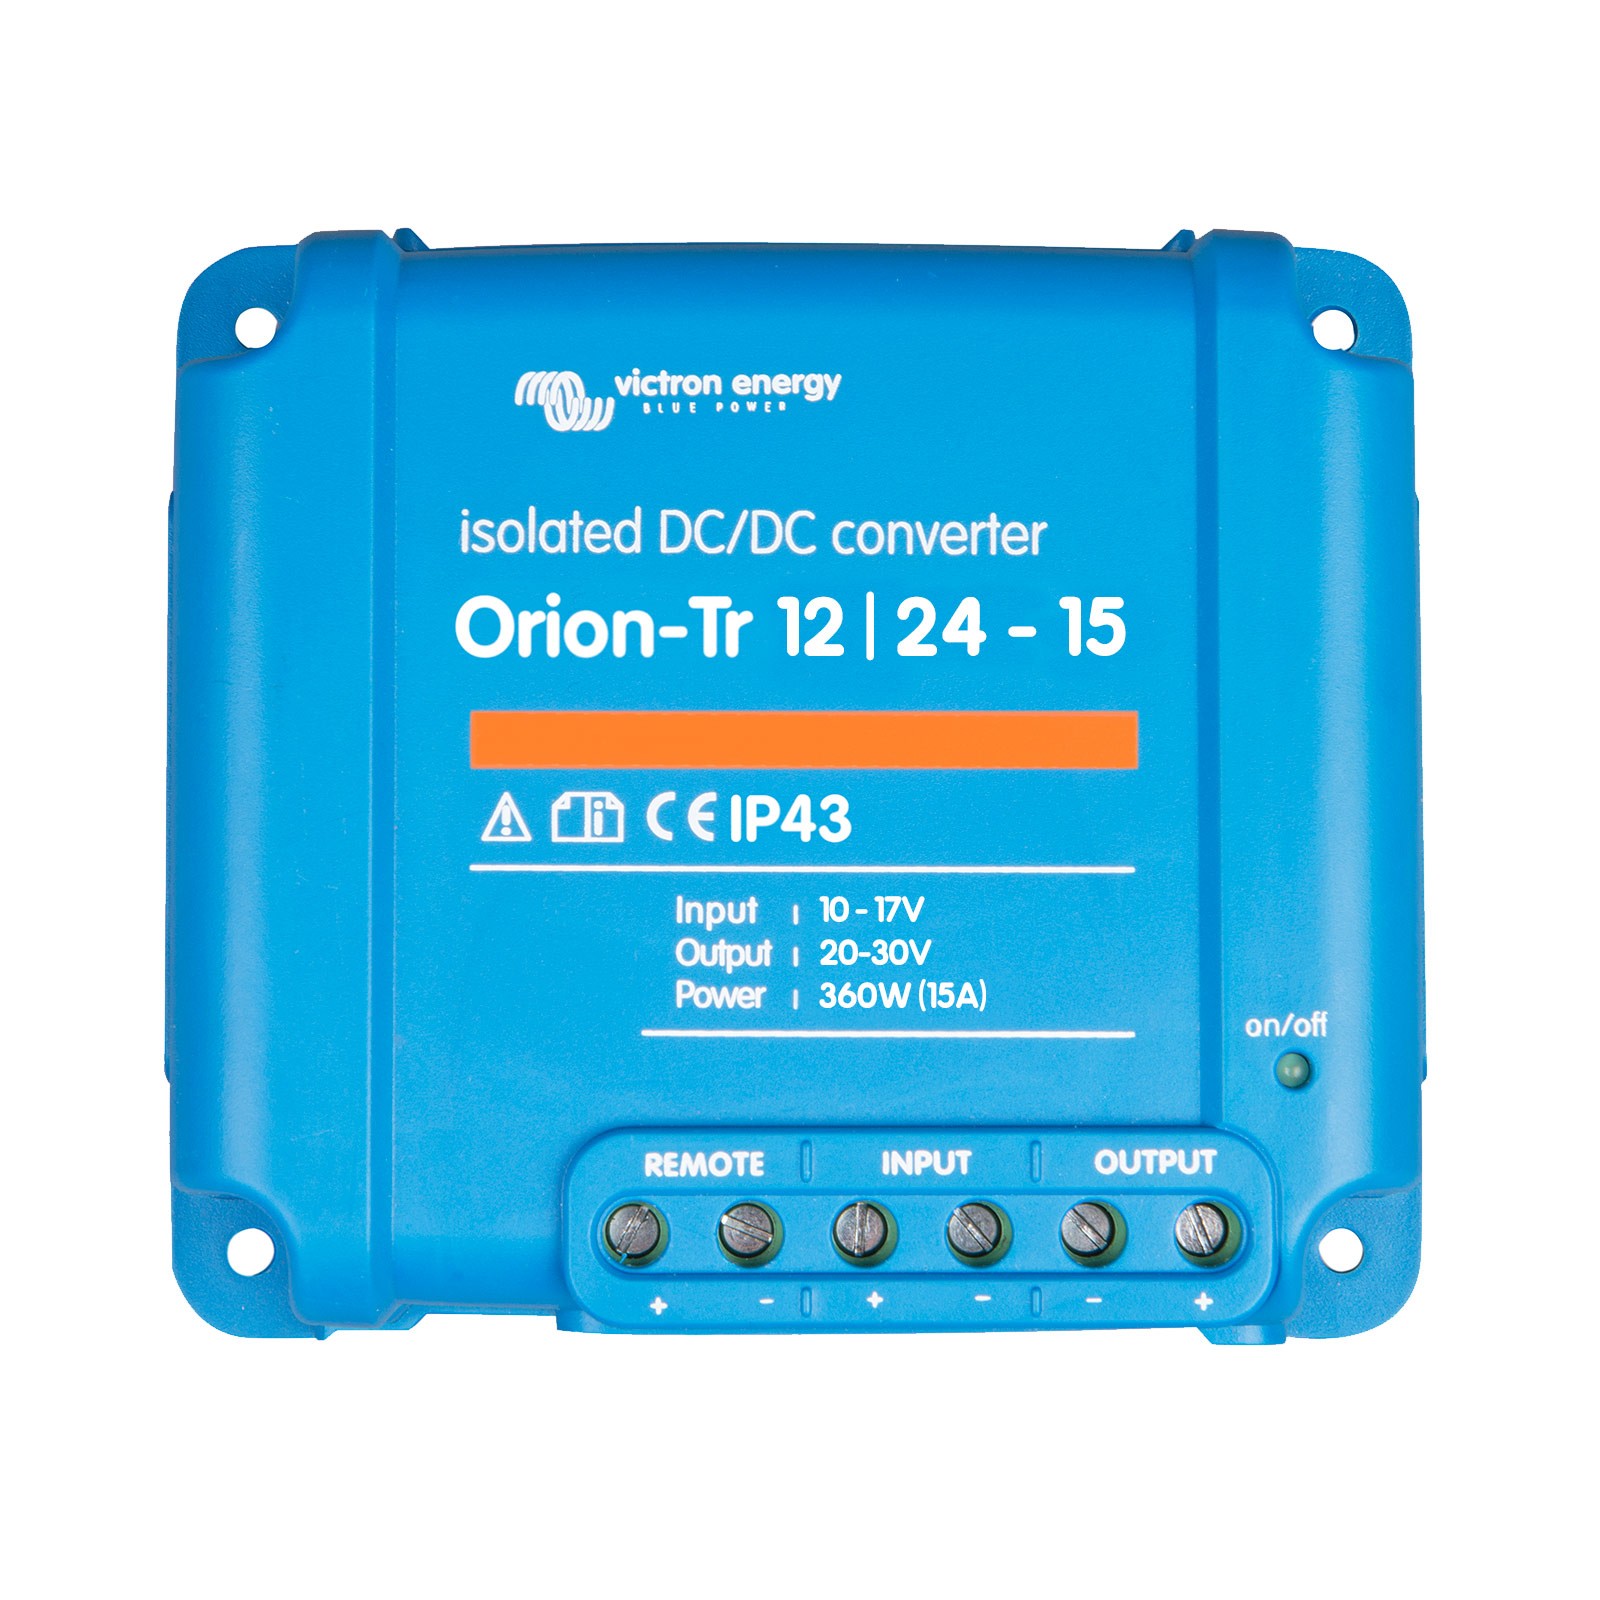 Orion-Tr 12/15-15 A Victron Energy isolated converter